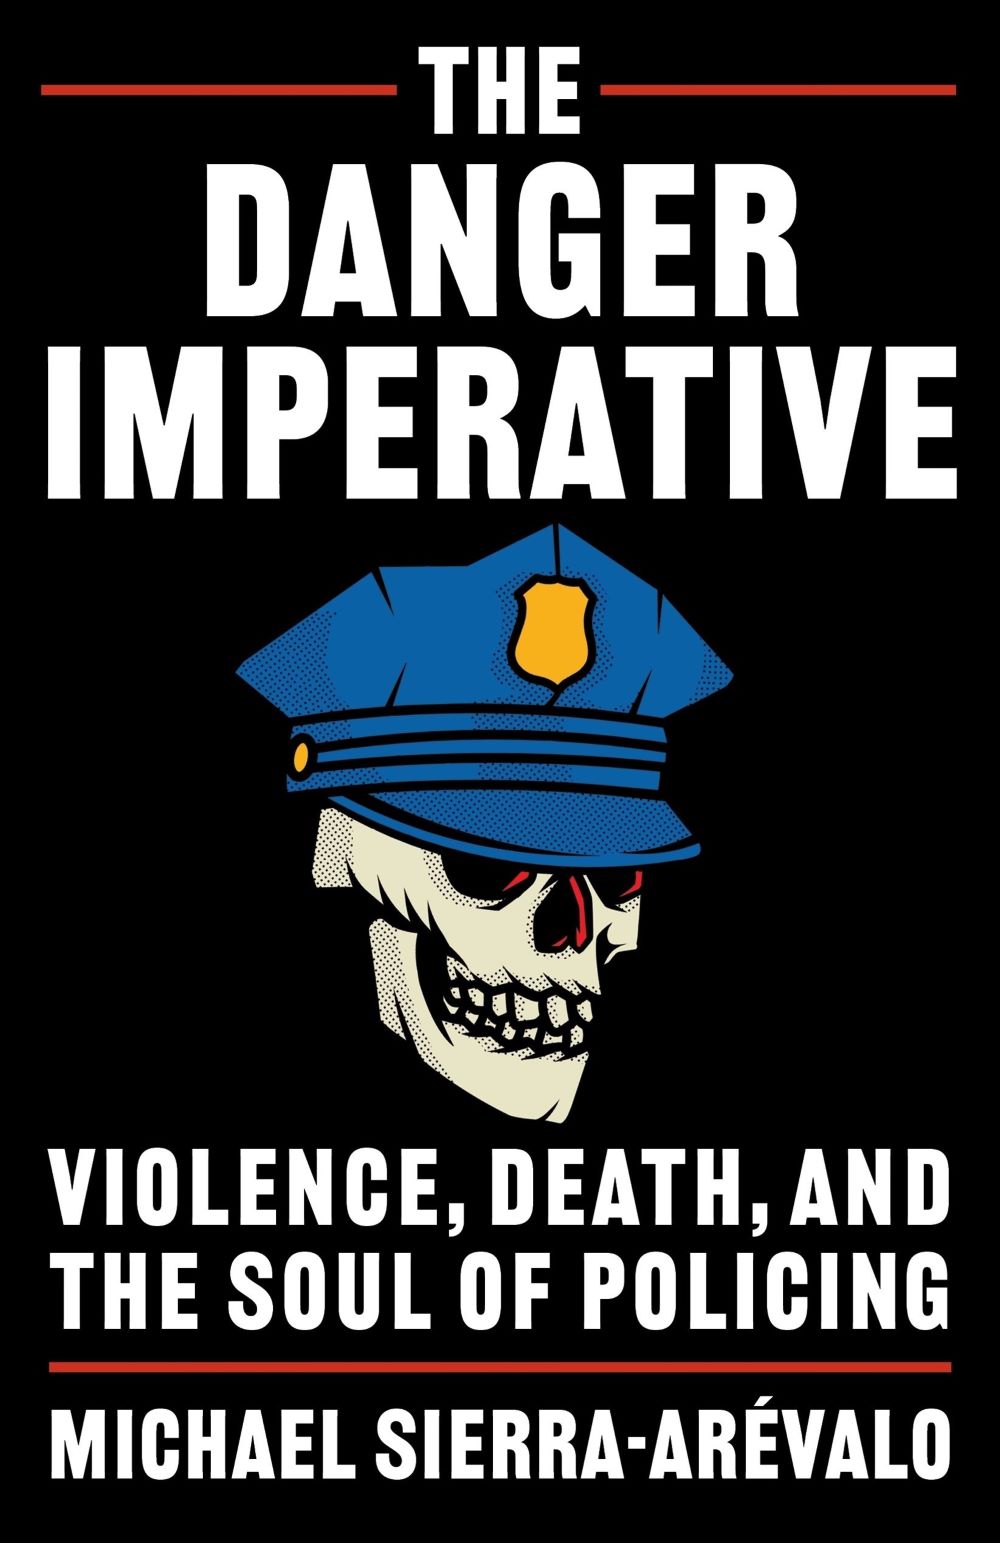 The Danger Imperative: Violence, Death, and the Soul of Policing book cover